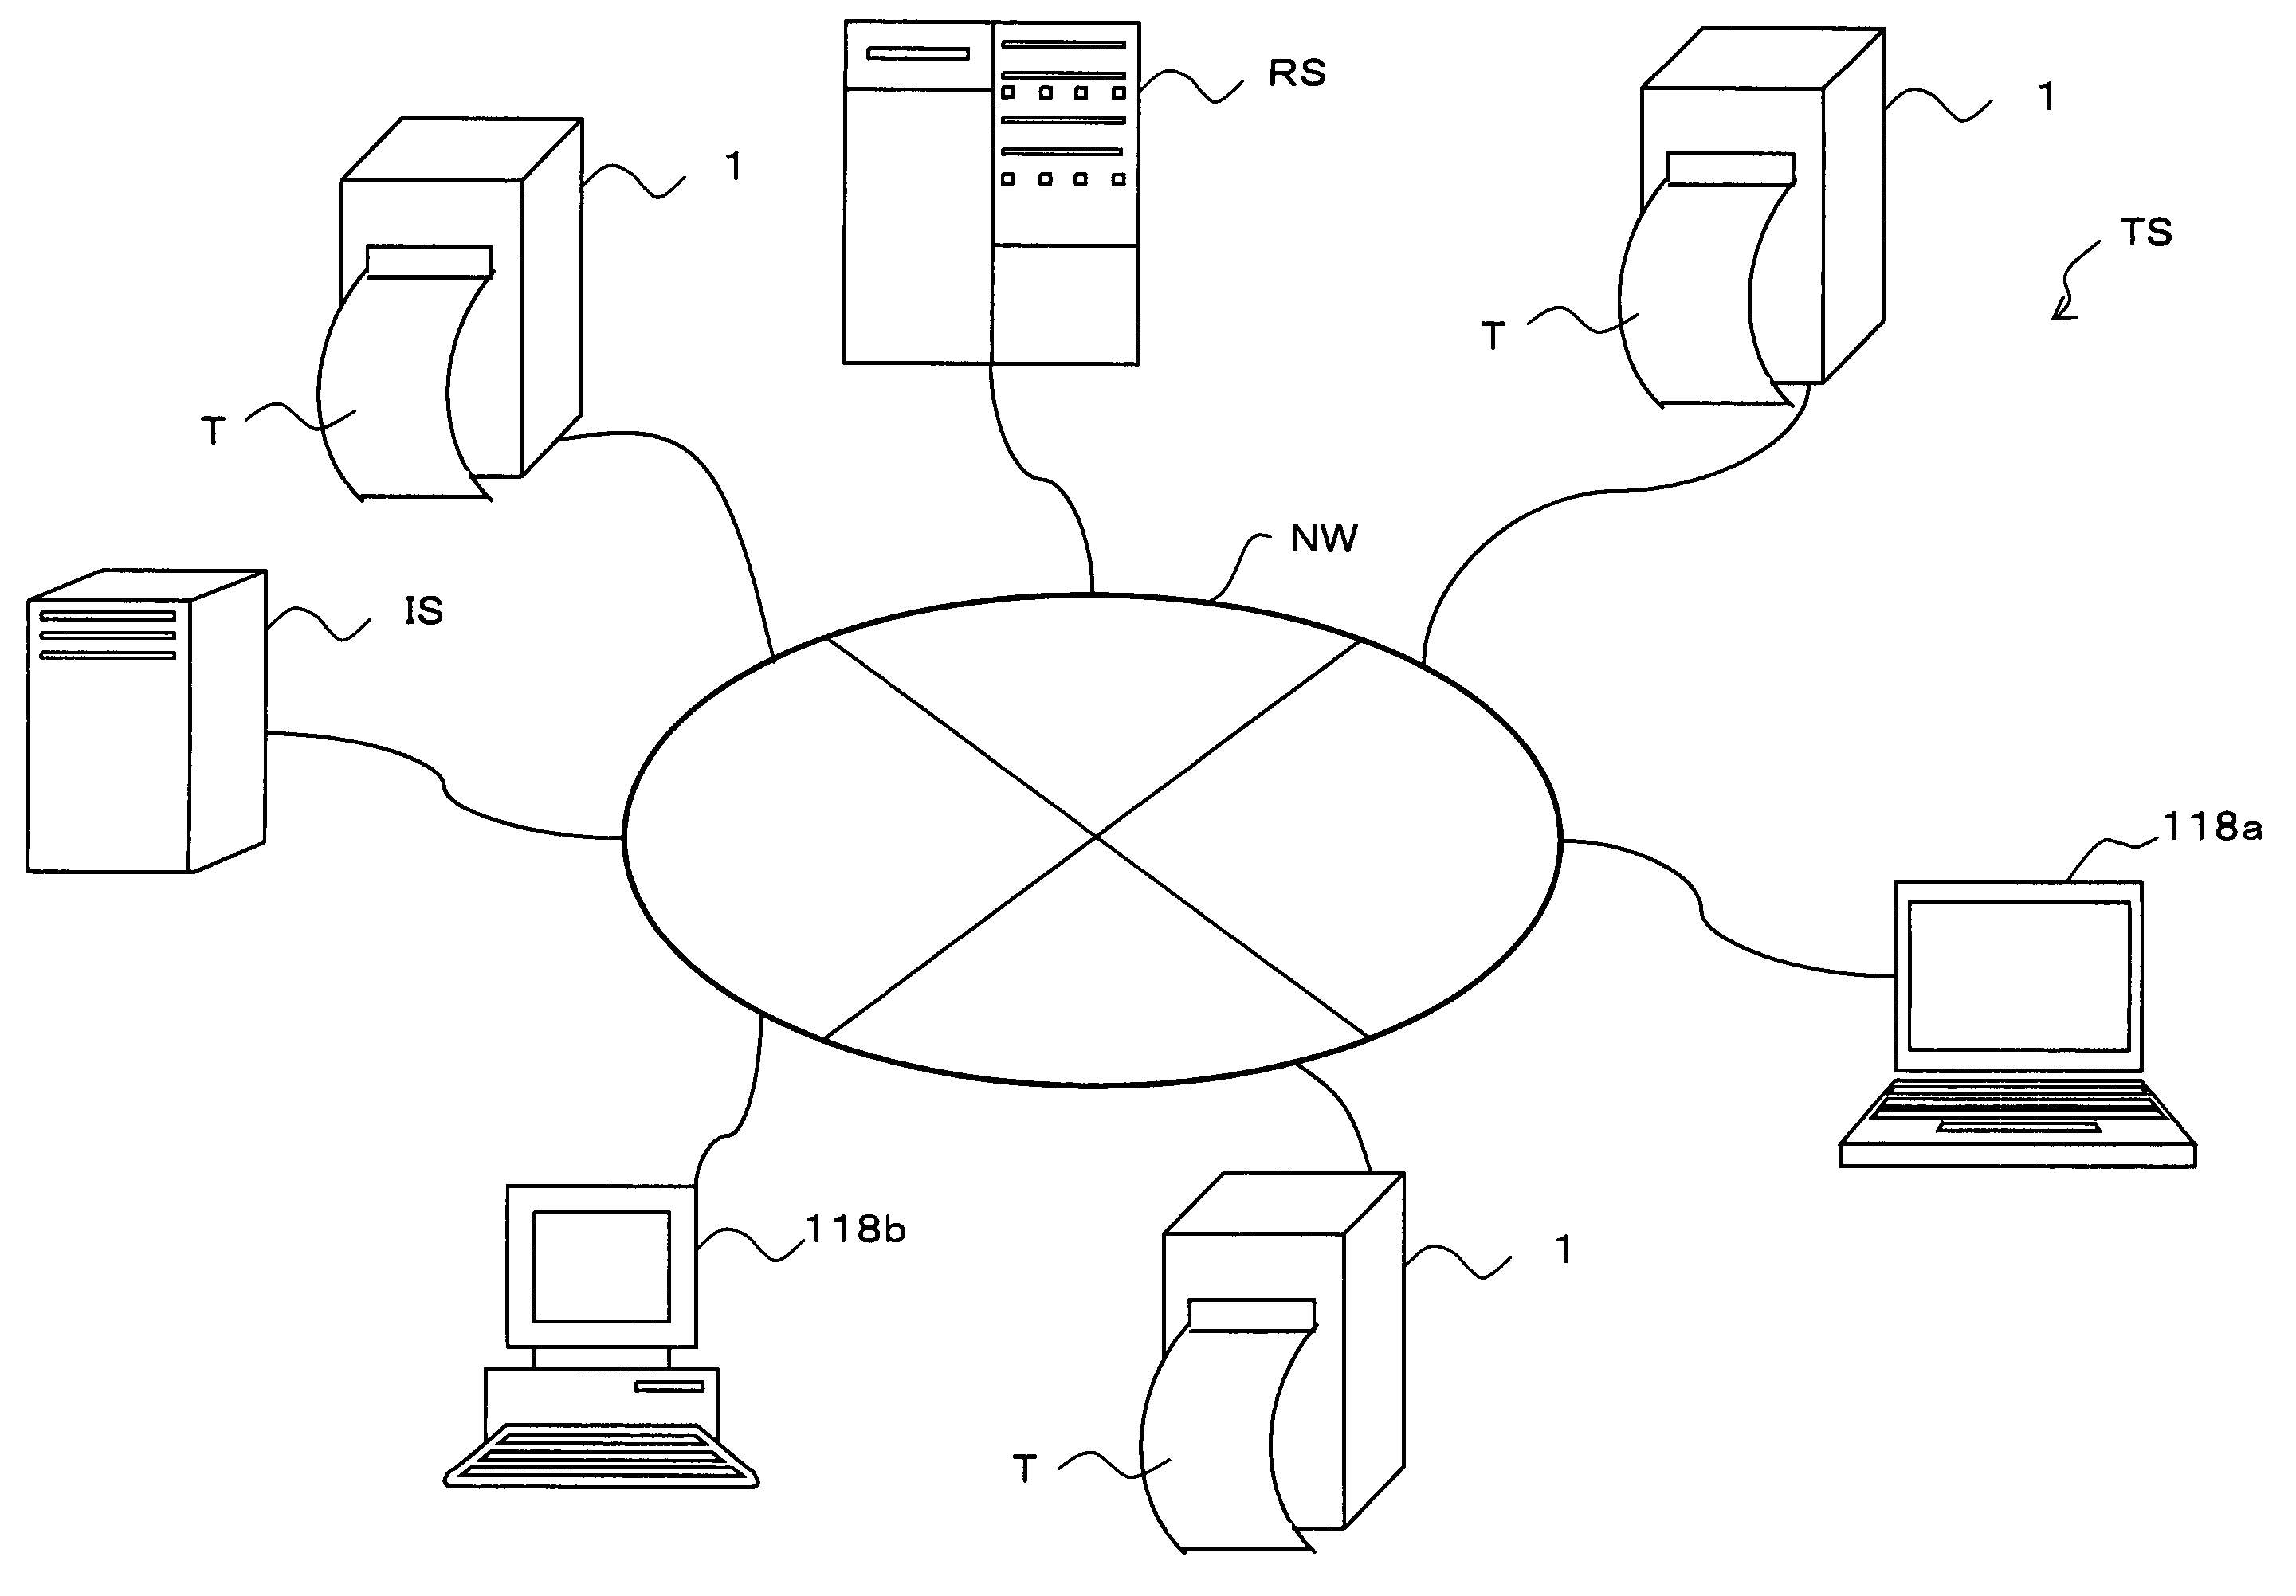 Tag-label producing device